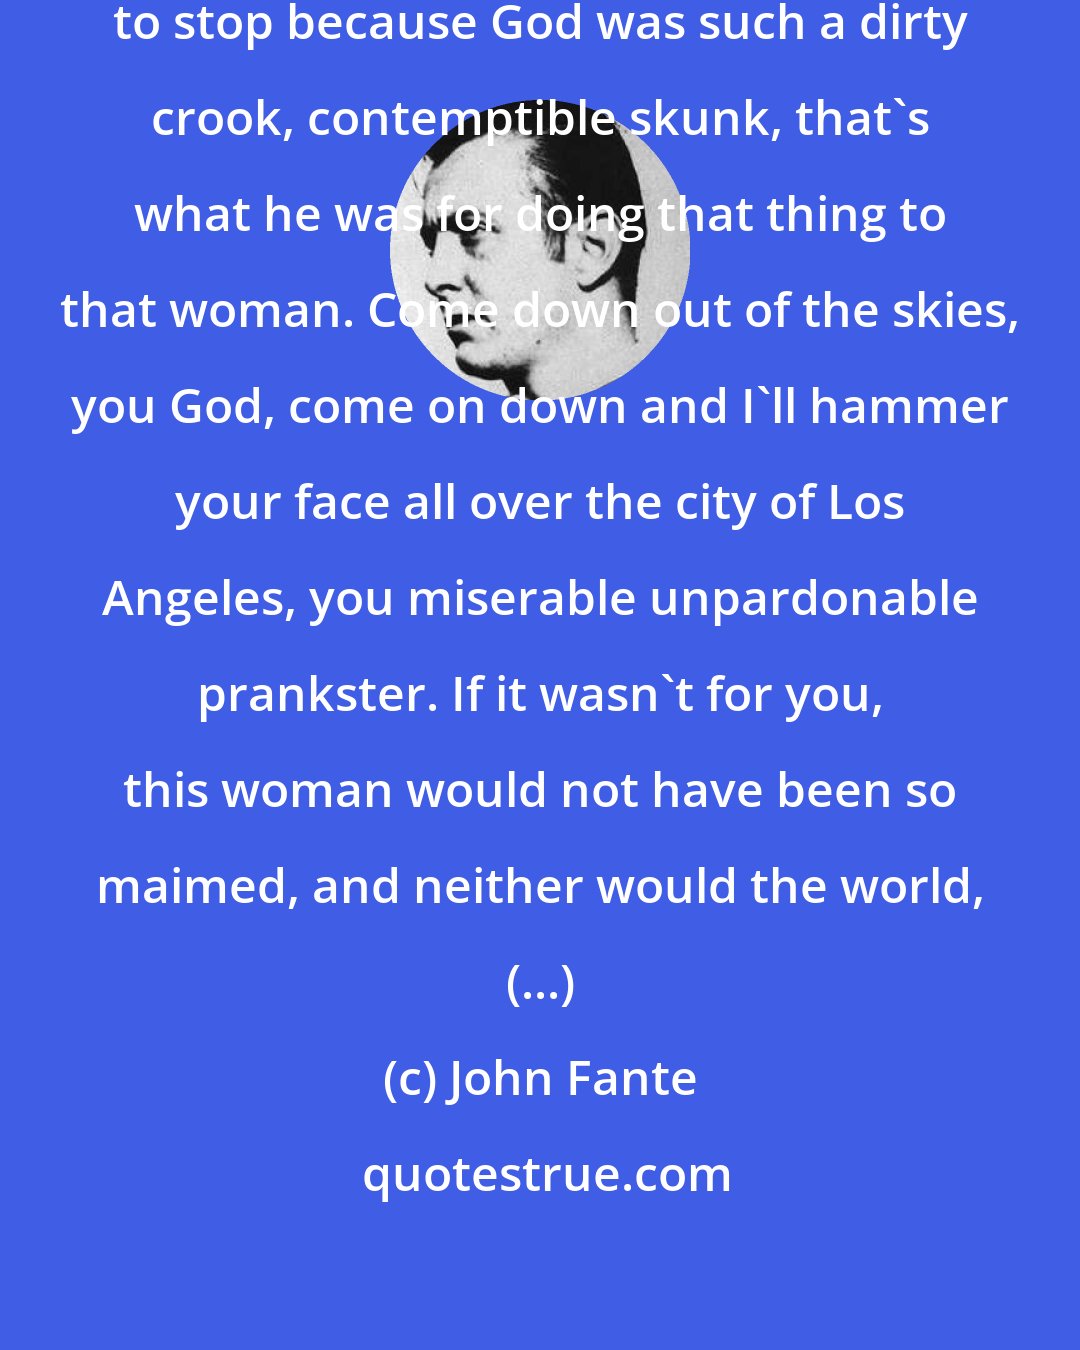 John Fante: (...) I let go, crying and unable to stop because God was such a dirty crook, contemptible skunk, that's what he was for doing that thing to that woman. Come down out of the skies, you God, come on down and I'll hammer your face all over the city of Los Angeles, you miserable unpardonable prankster. If it wasn't for you, this woman would not have been so maimed, and neither would the world, (...)